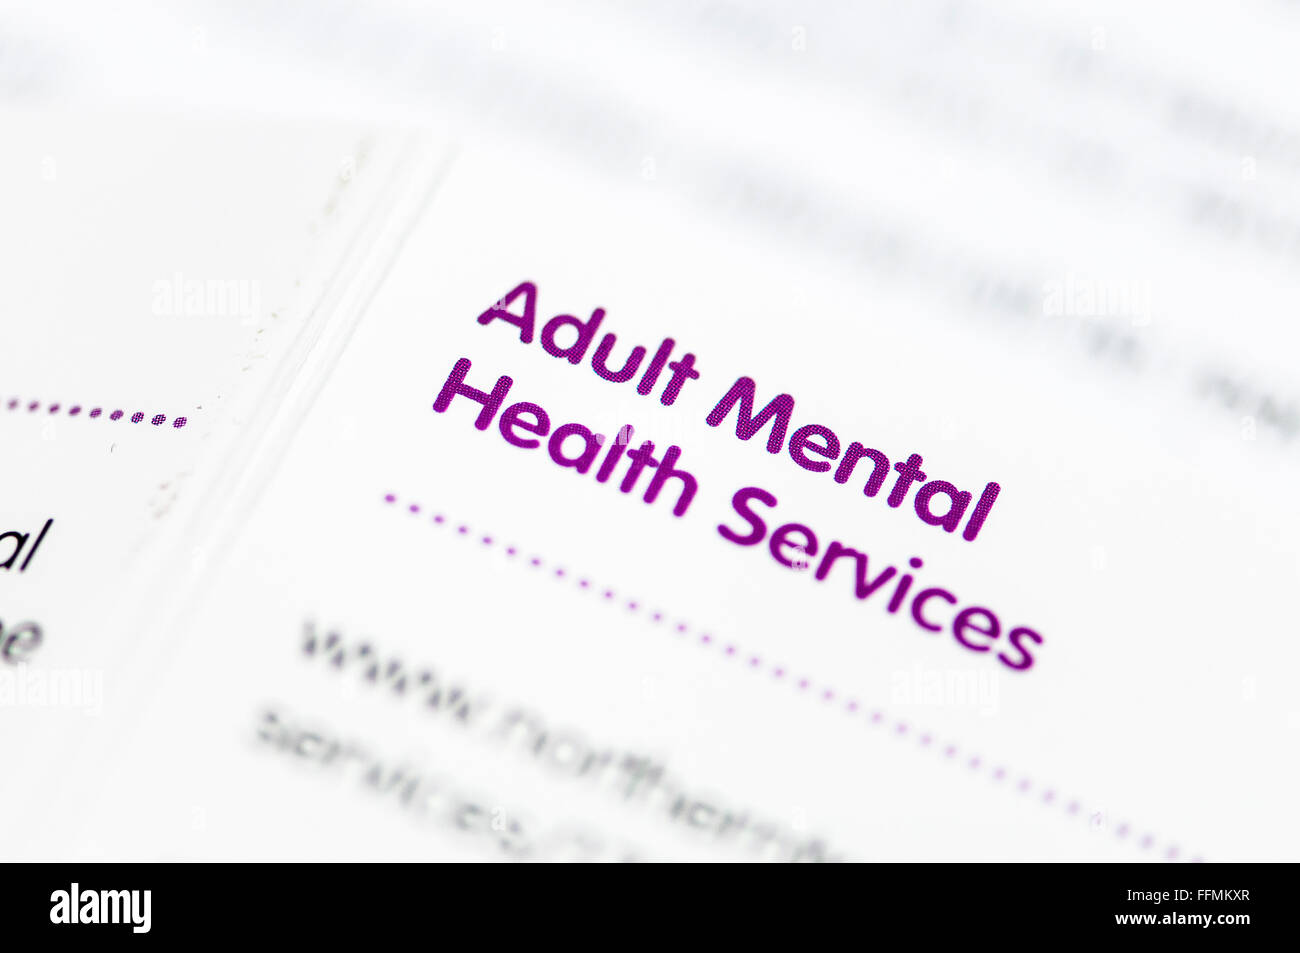 Directory of Adult Mental Health Services for Northern Ireland. Stock Photo